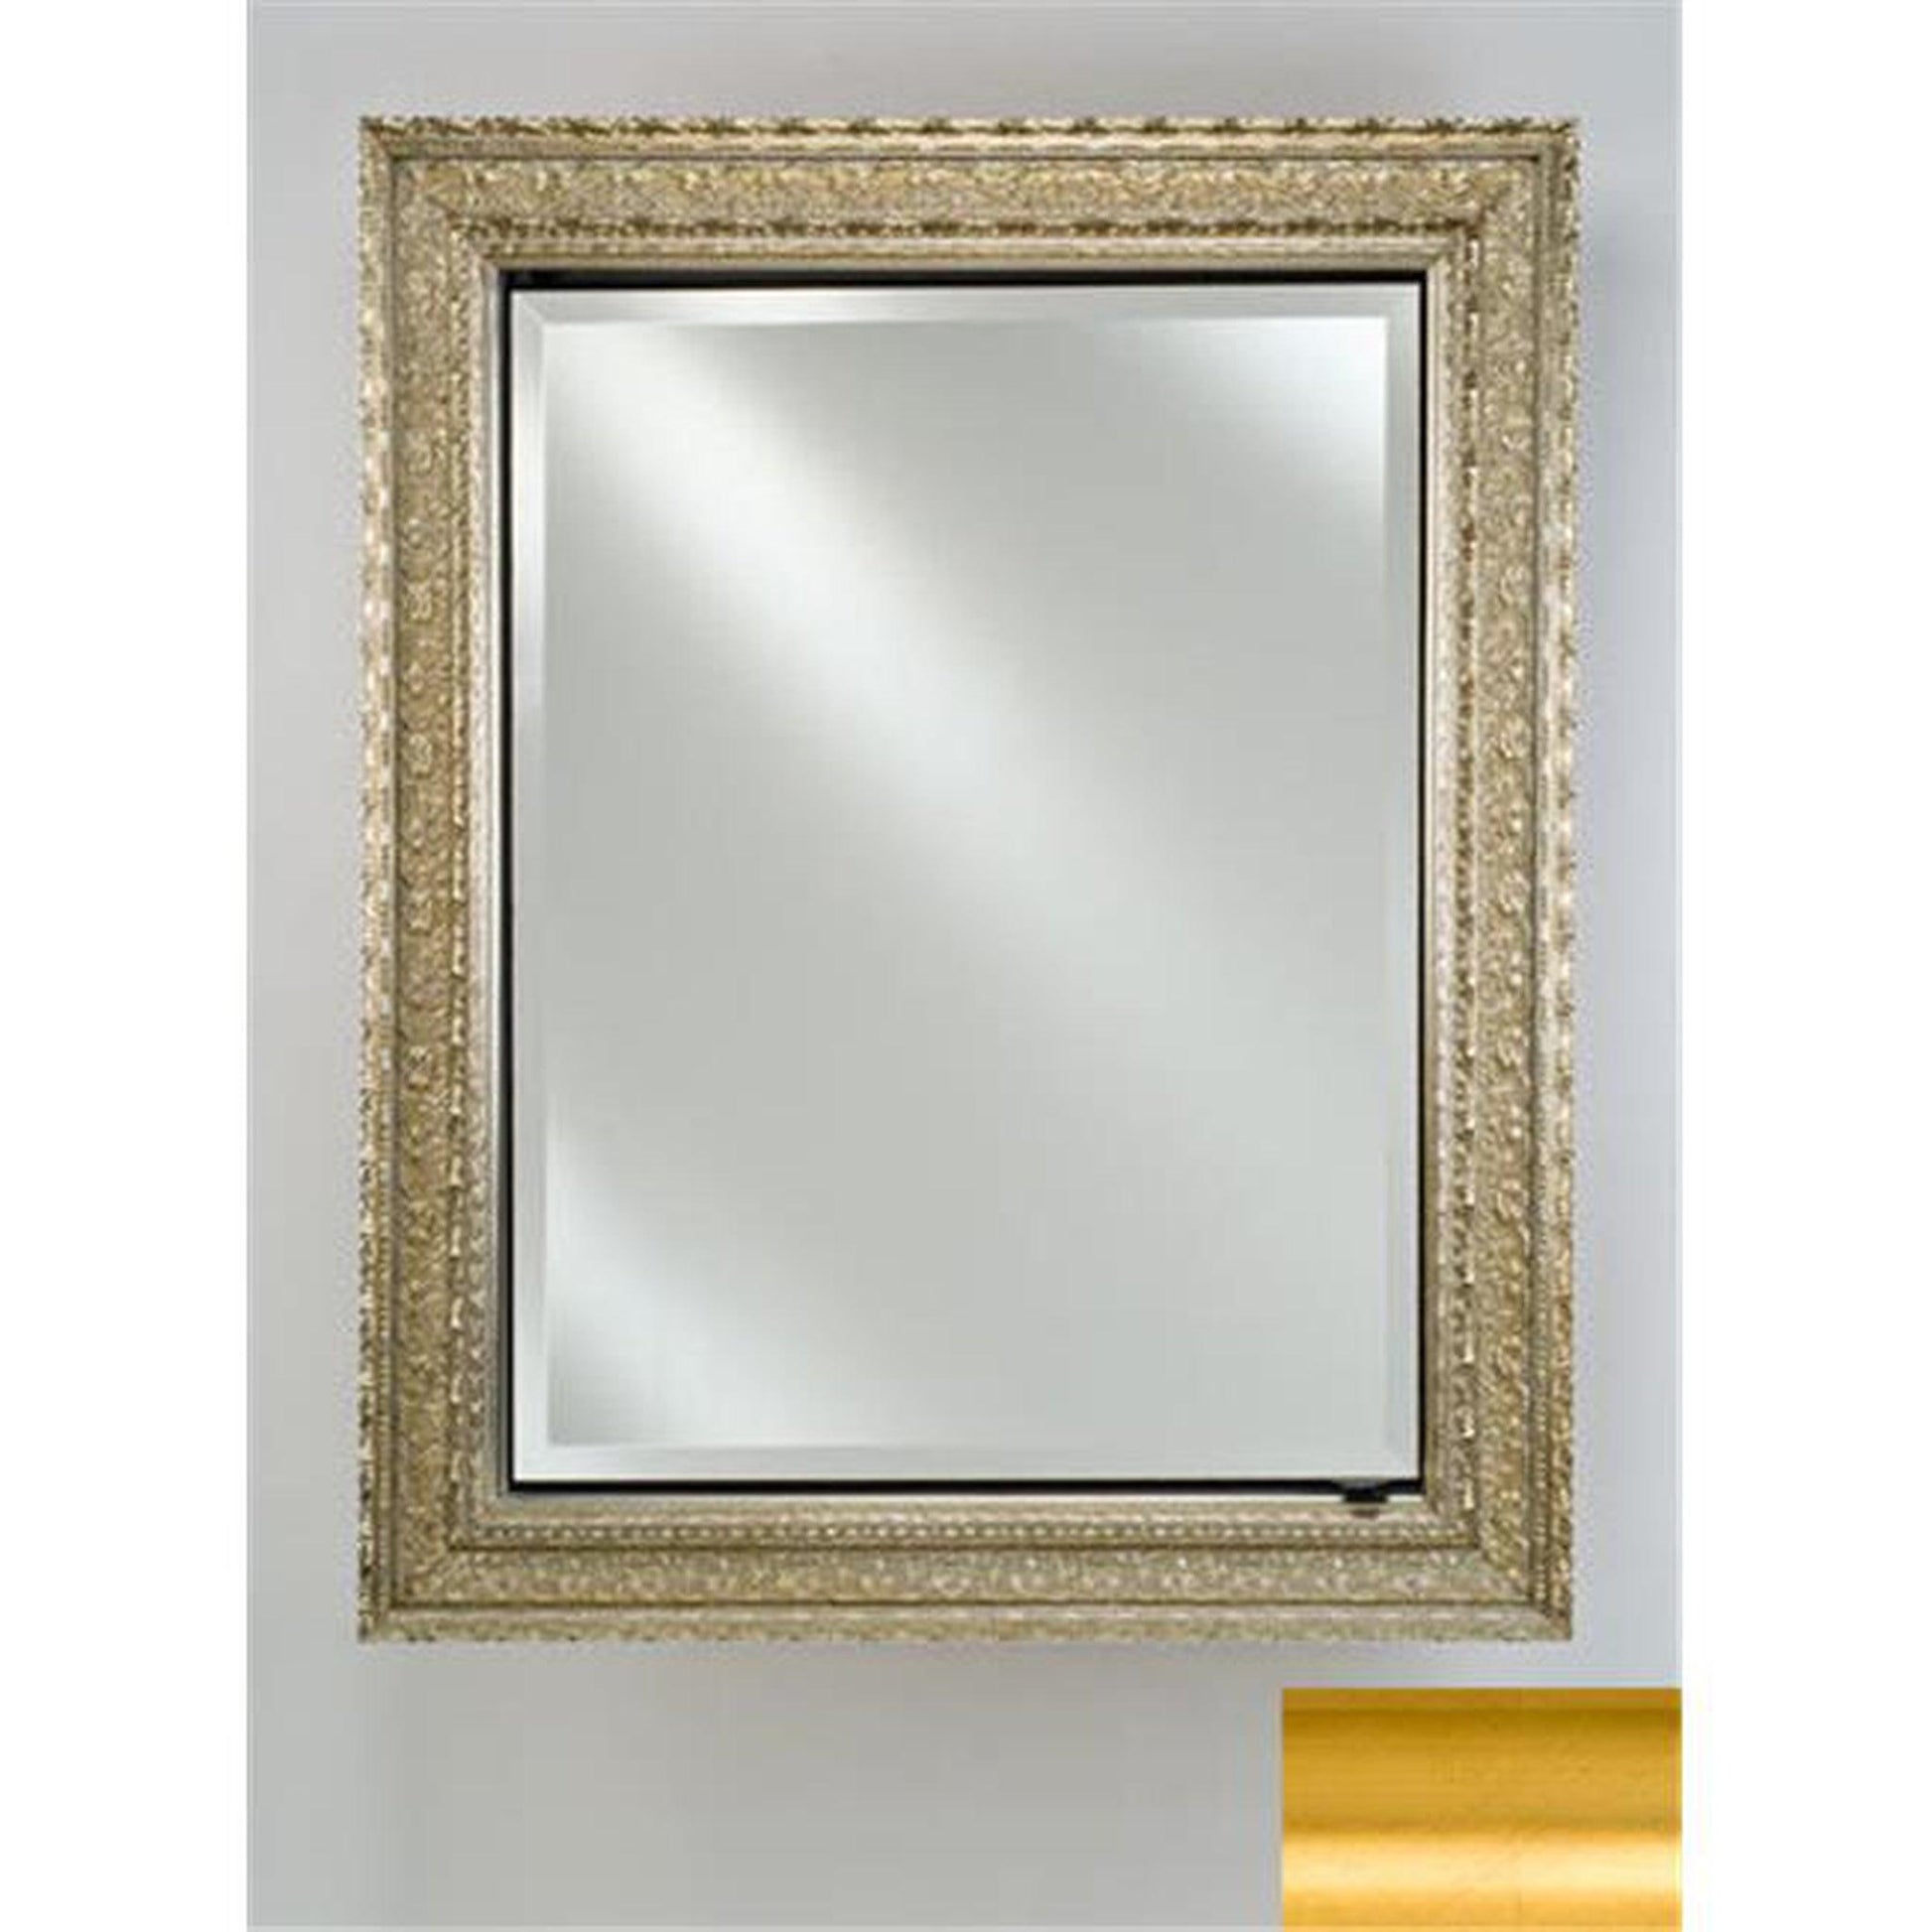 Afina Signature 24" x 30" Brushed Satin Gold Recessed Reversible Hinged Single Door Medicine Cabinet With Beveled Edge Mirror